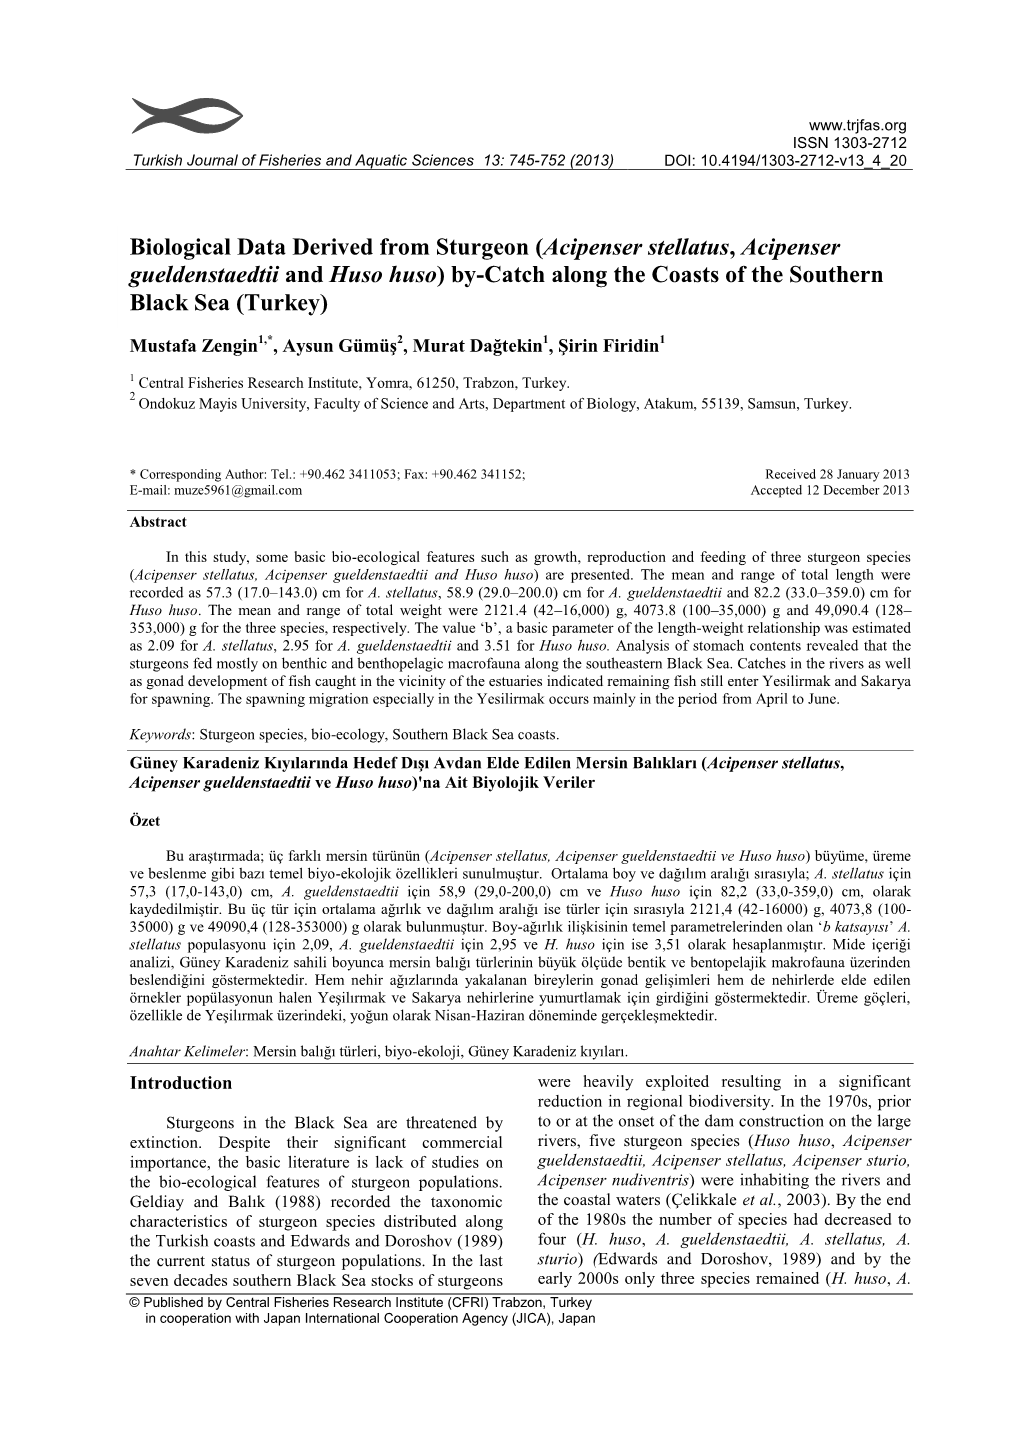 Biological Data Derived from Sturgeon (Acipenser Stellatus, Acipenser Gueldenstaedtii and Huso Huso) By-Catch Along the Coasts of the Southern